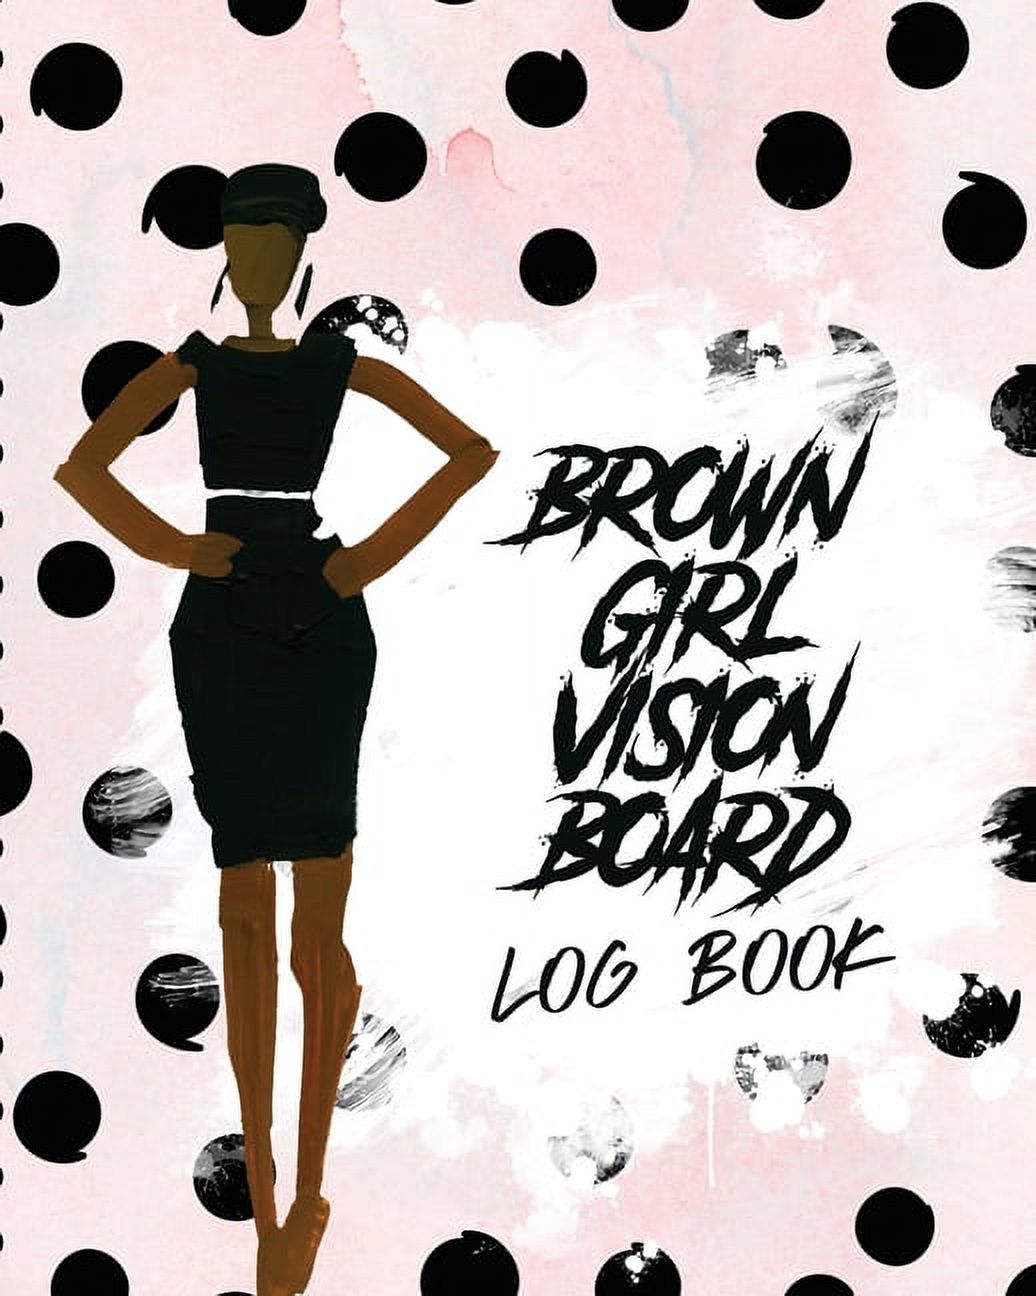 Brown Girl Vision Board Log Book: For Students | Ideas | Workshop | Goal Setting